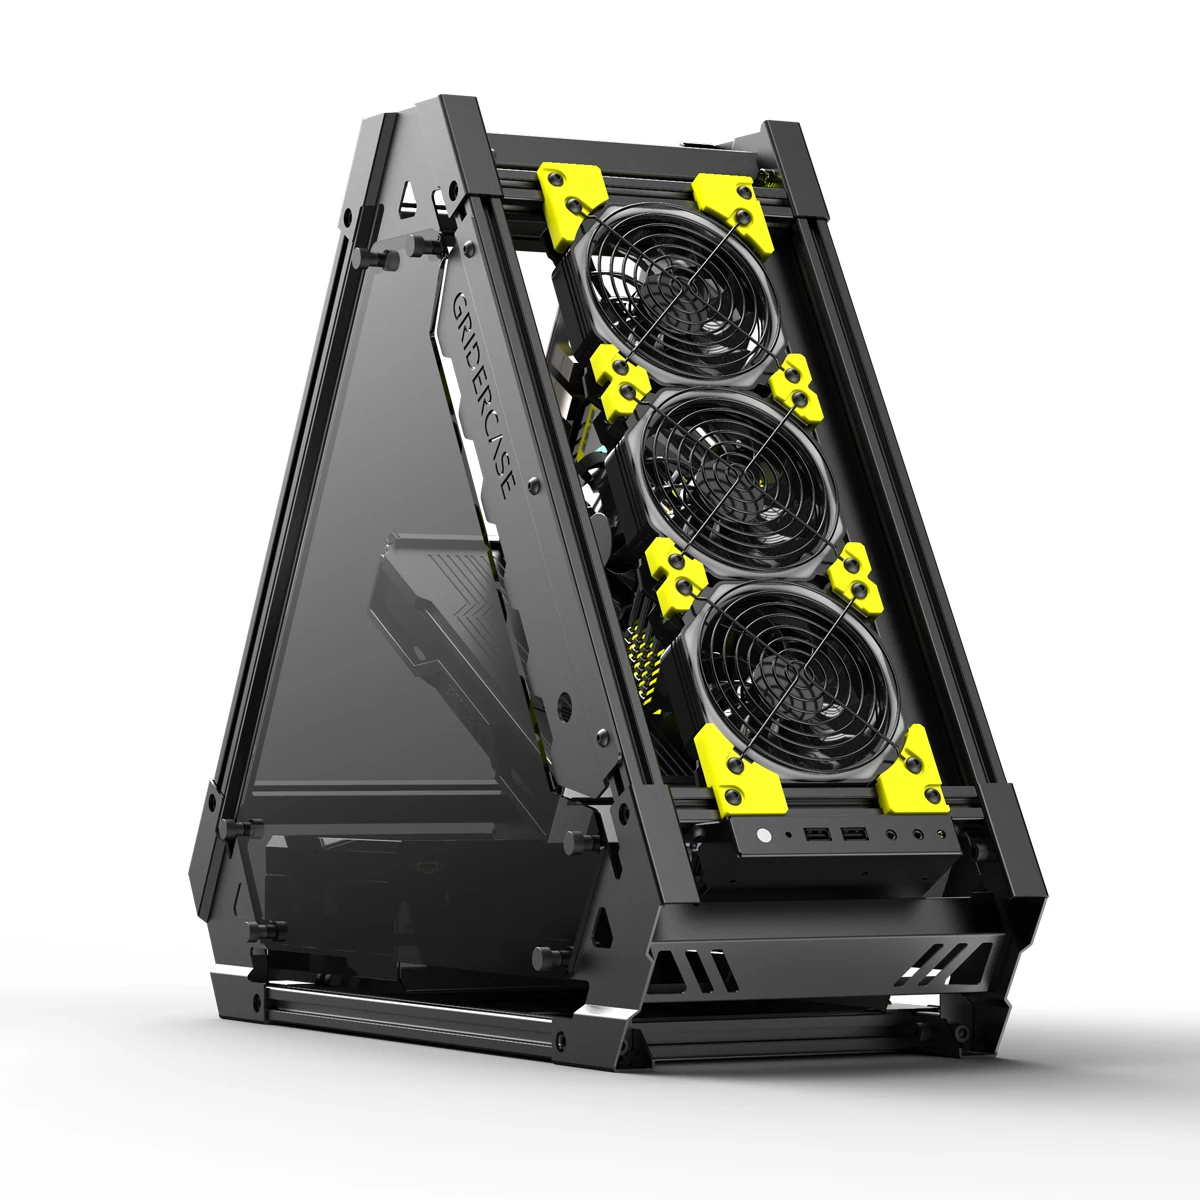 

VED* HA Delta V1D Aluminum Alloy Computer Open Chassis Water Cooling Support ATX/MATX/ITX Motherboard Gaming Building PC Case